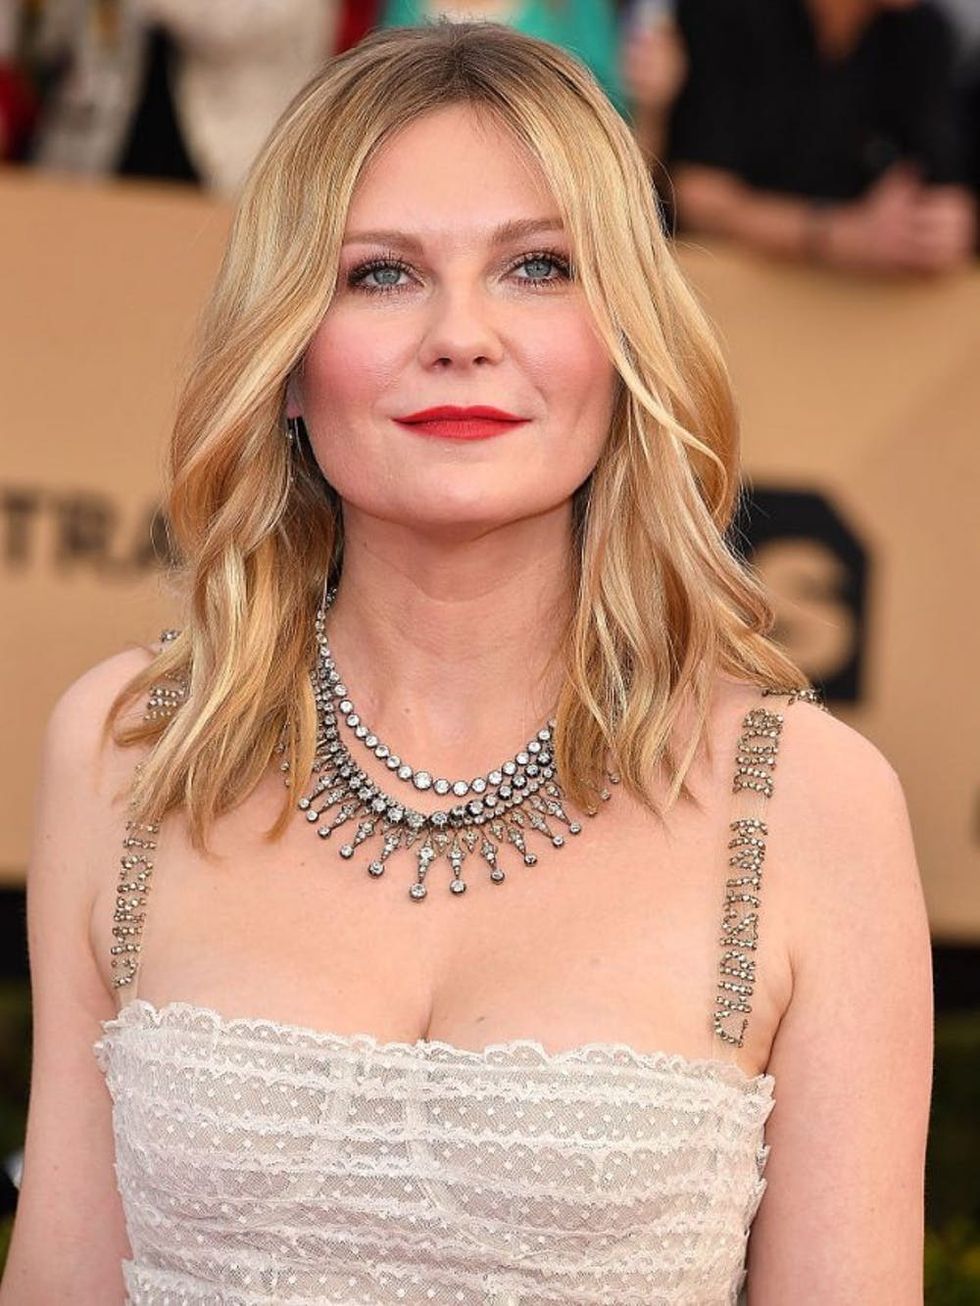 LOS ANGELES, CA - JANUARY 29: Kirsten Dunst arrives at the 23rd Annual Screen Actors Guild Awards at The Shrine Expo Hall on January 29, 2017 in Los Angeles, California. (Photo by Steve Granitz/WireImage)